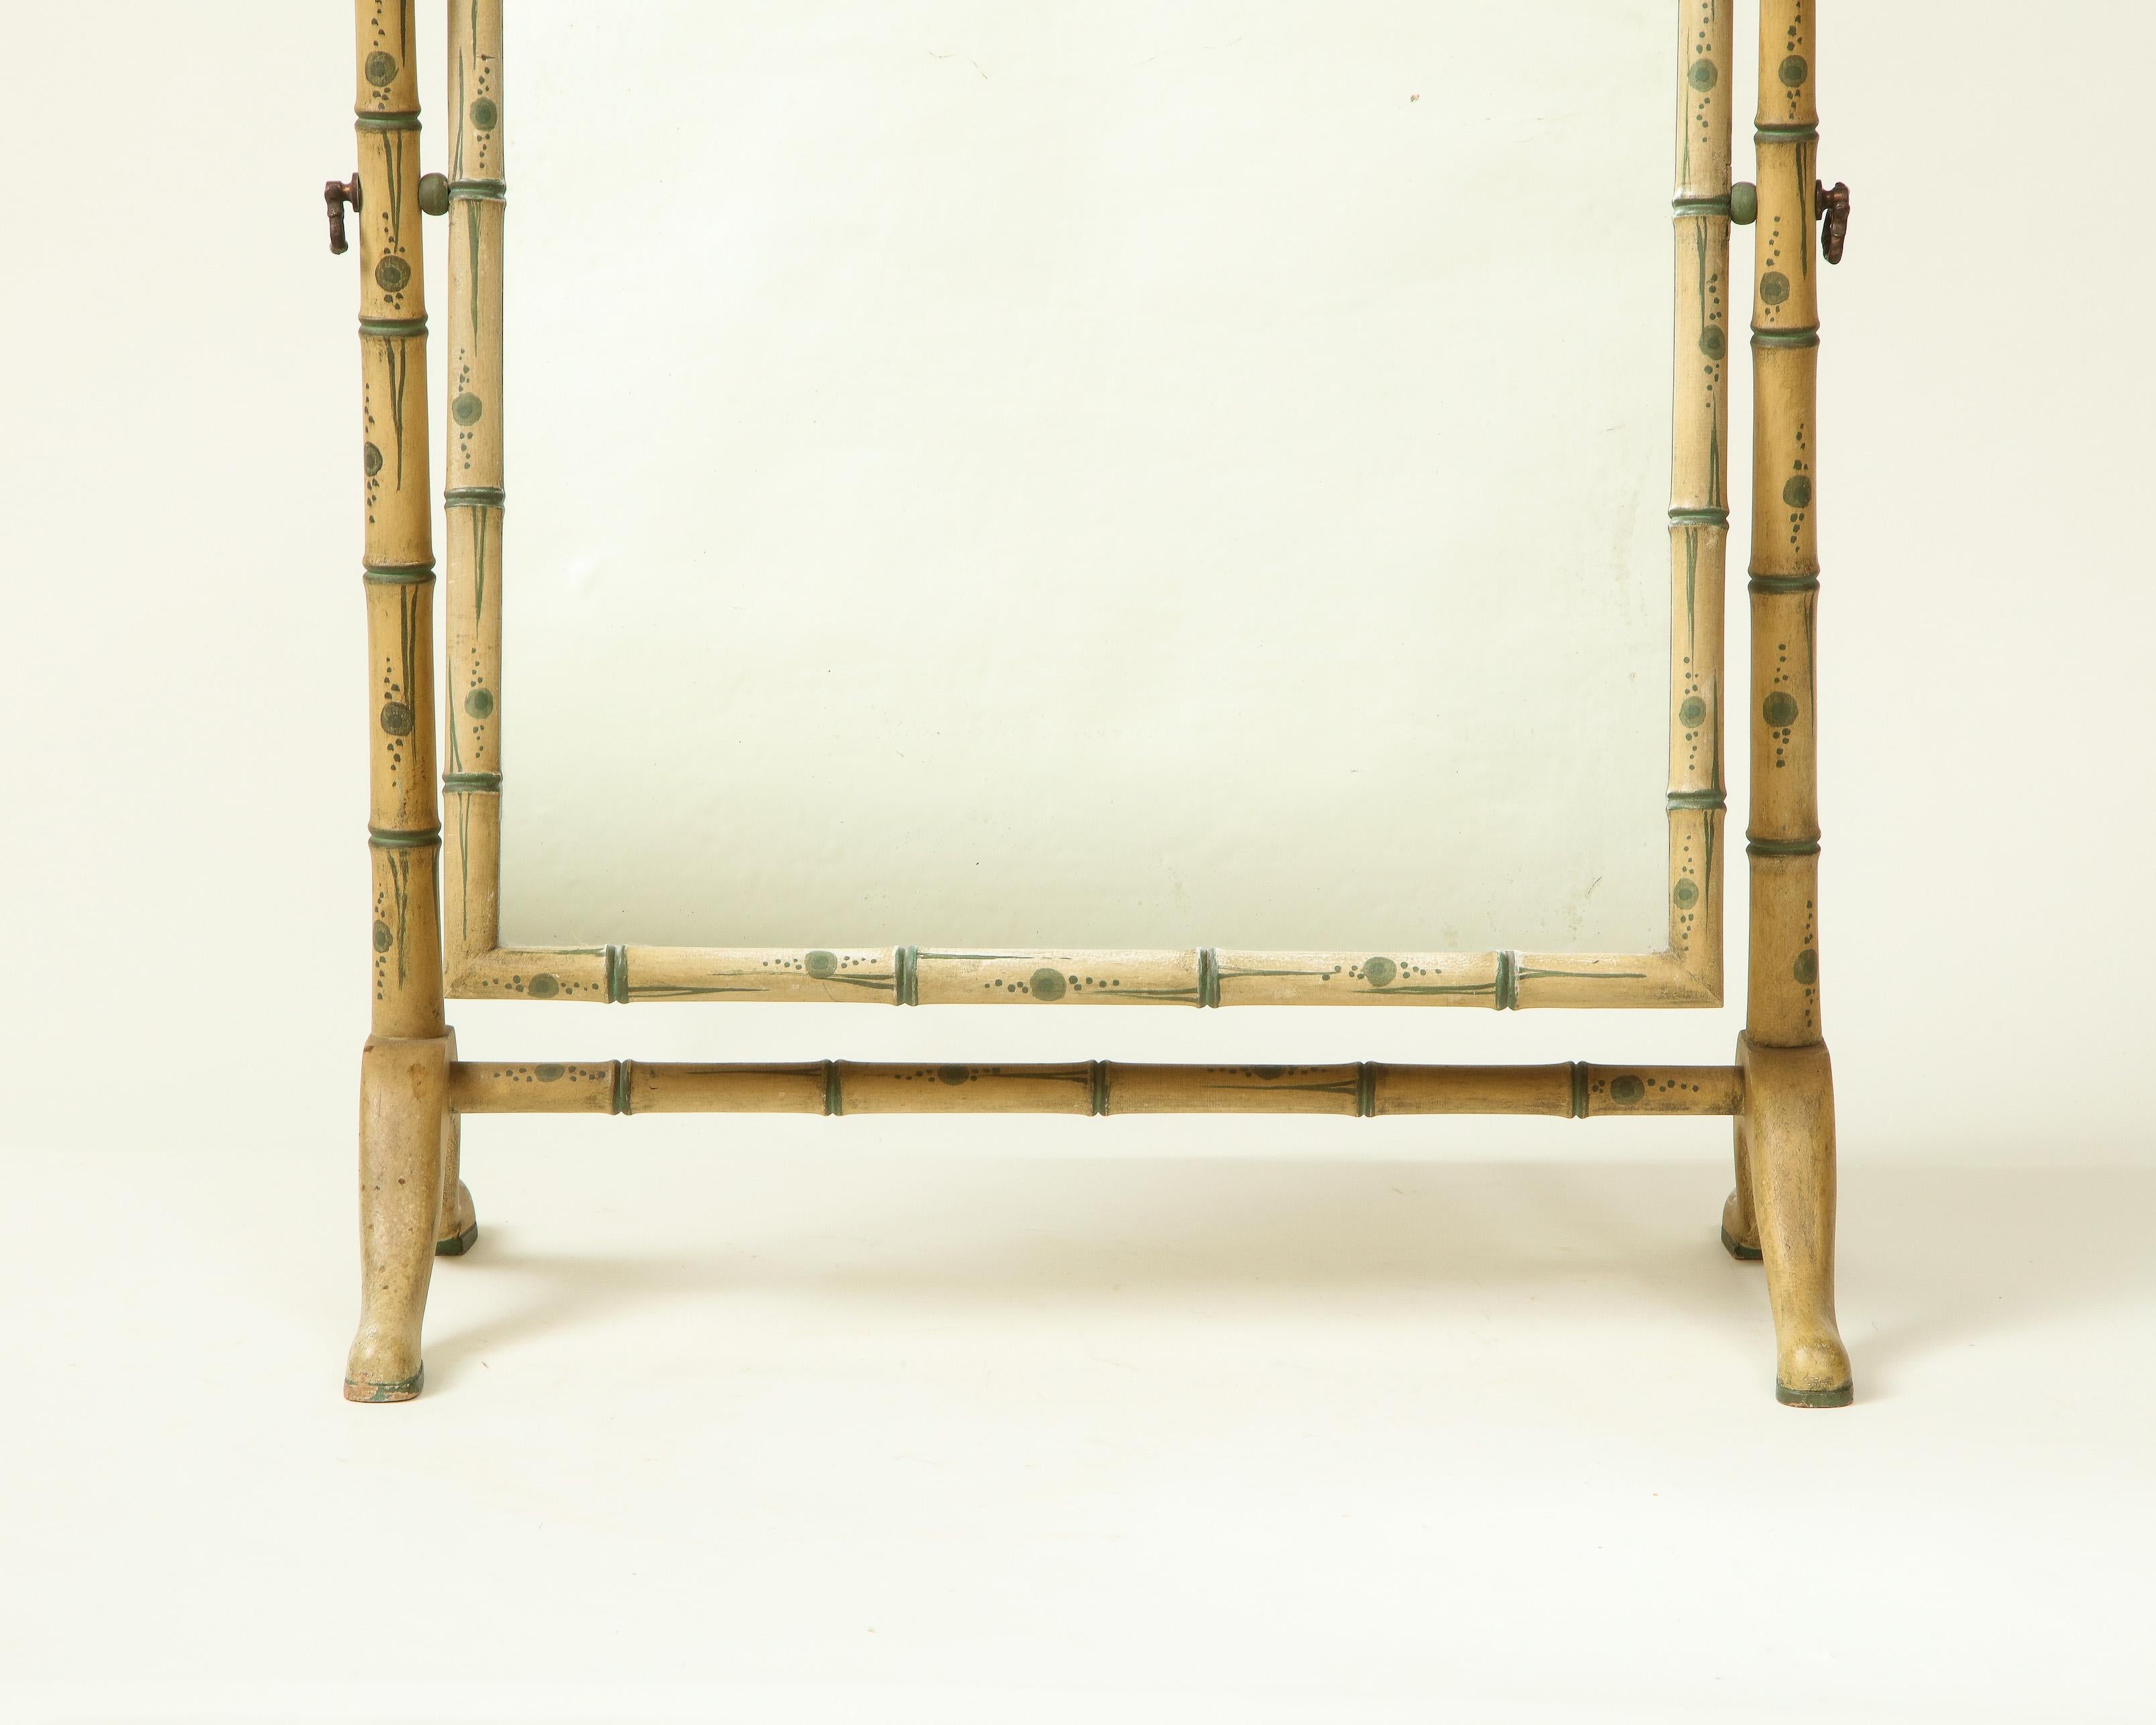 The arched rotating mirror plate within a conforming ivory painted wood surround with blue bamboo detailing, supported by two side uprights joined by a stretcher.

Provenance: From the Collection of Mario Buatta, New York, NY.